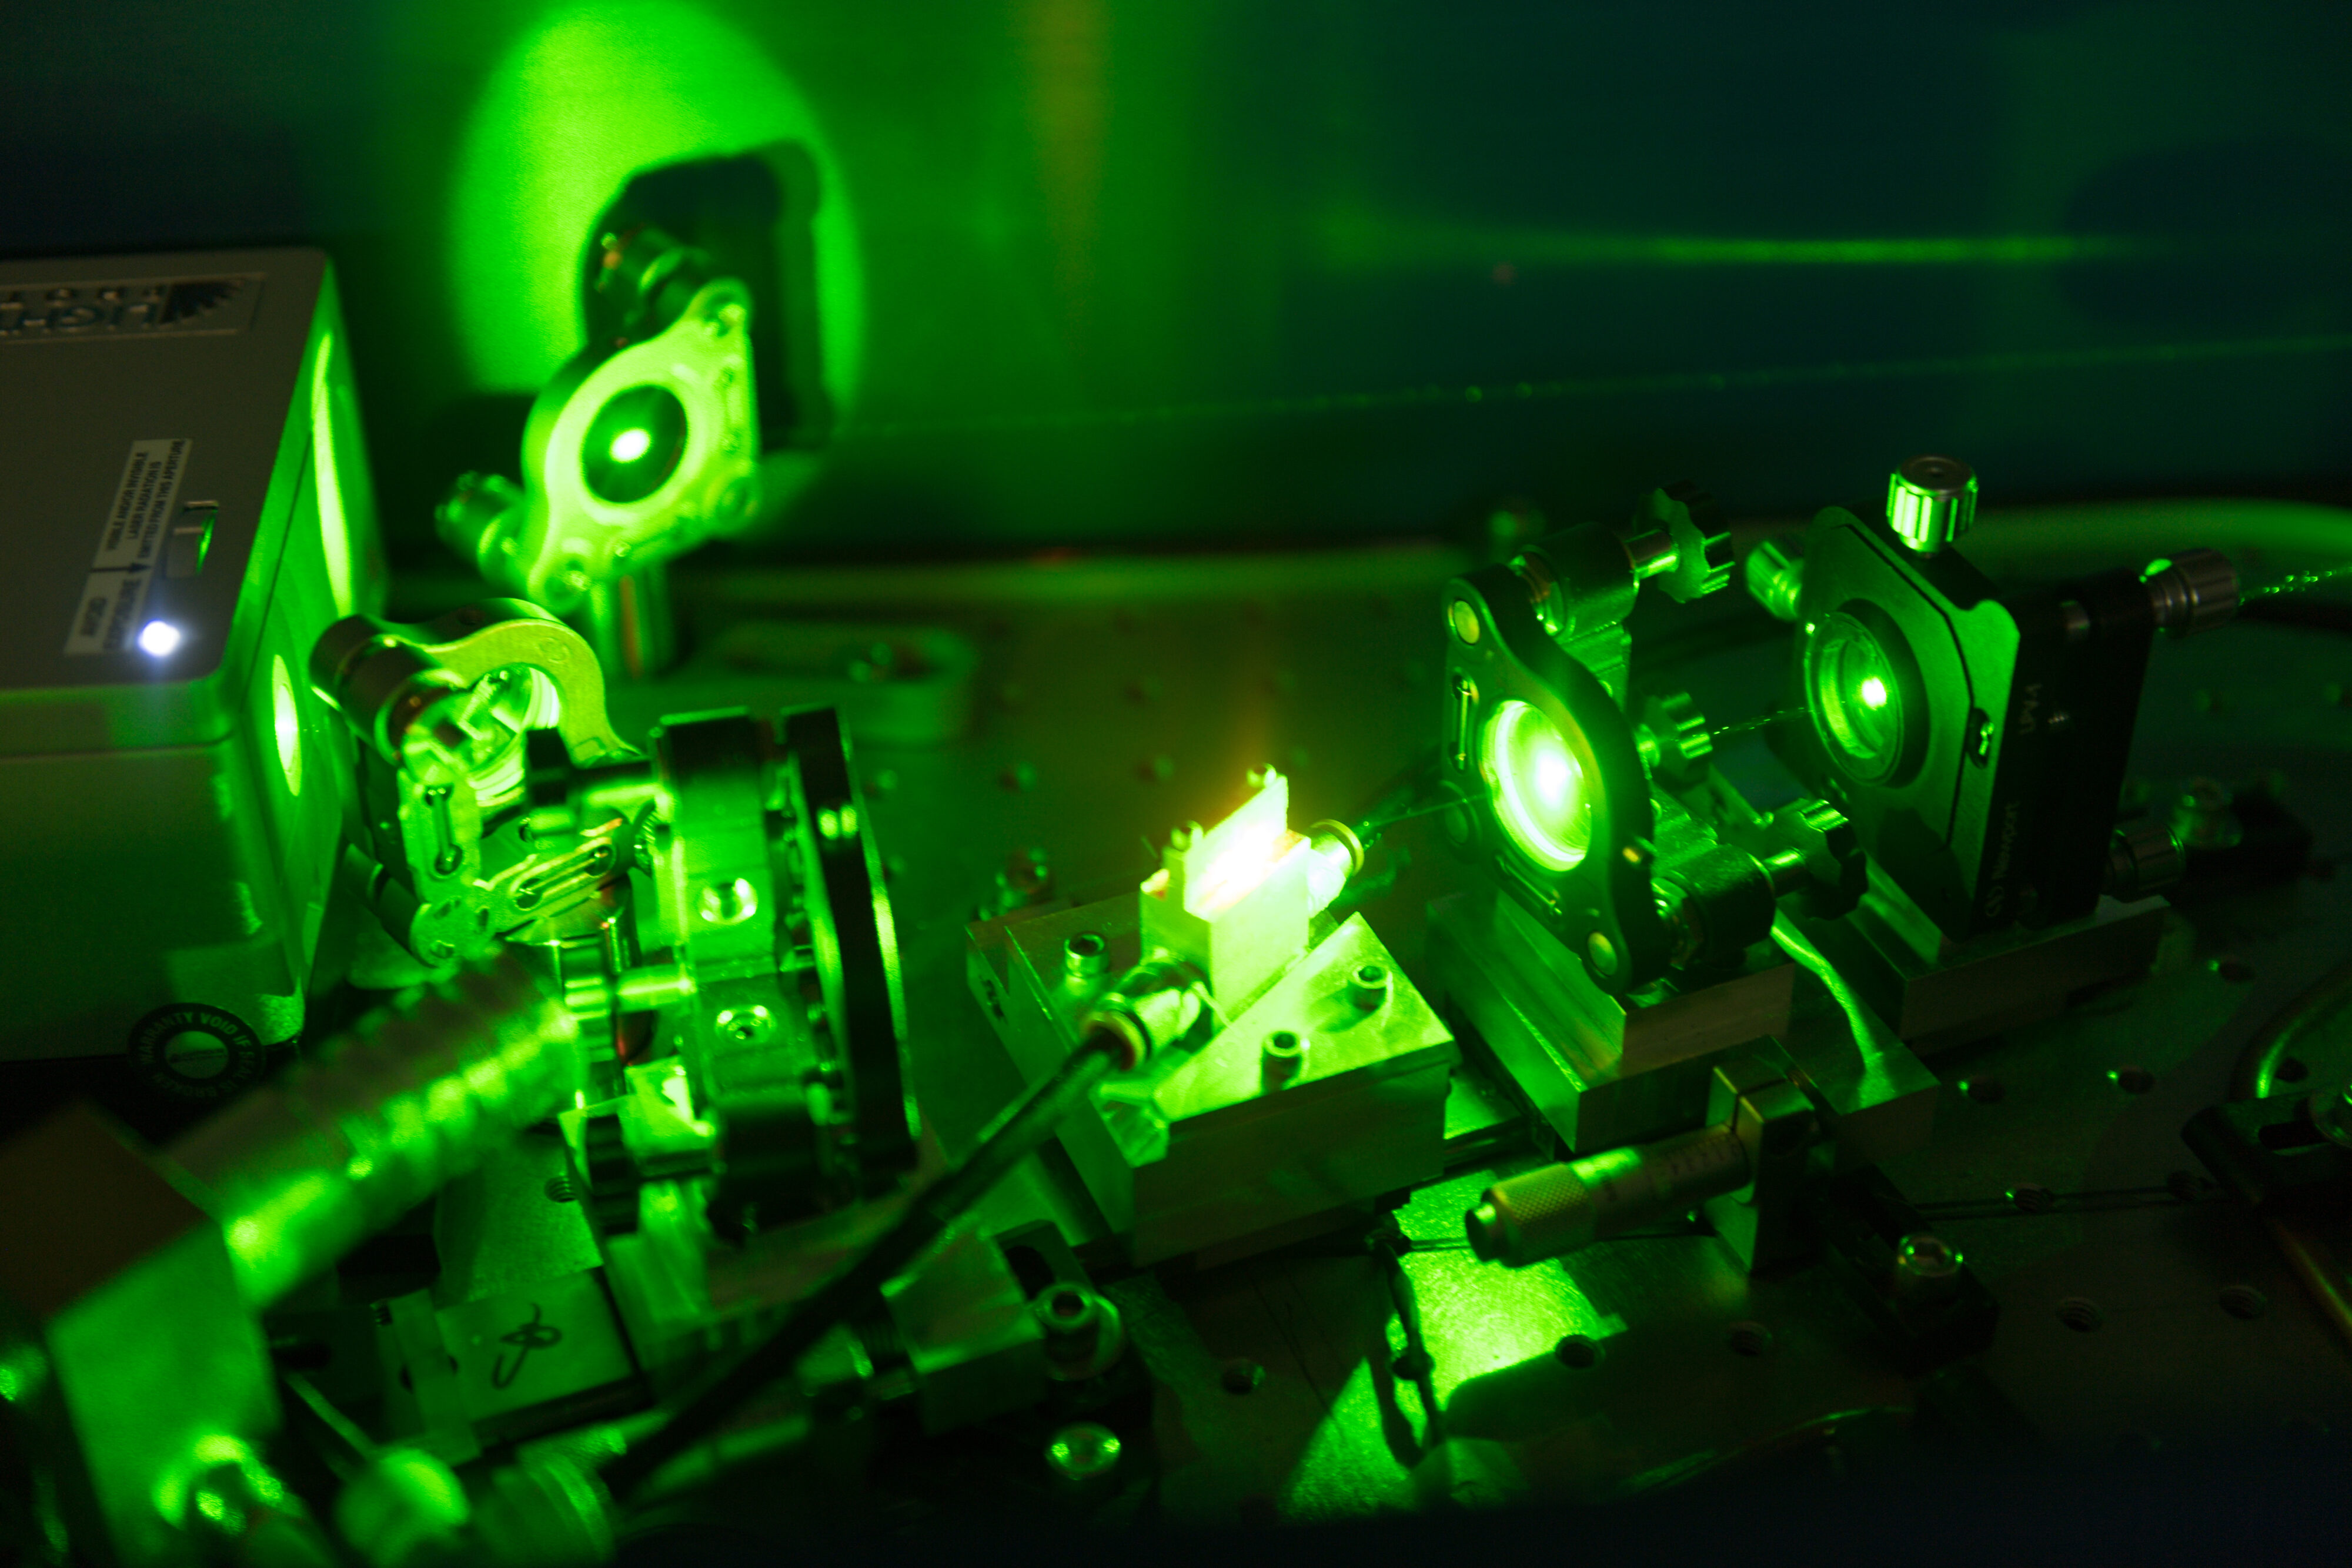 Colorado Researchers Are Using Lasers to Study What Happens After